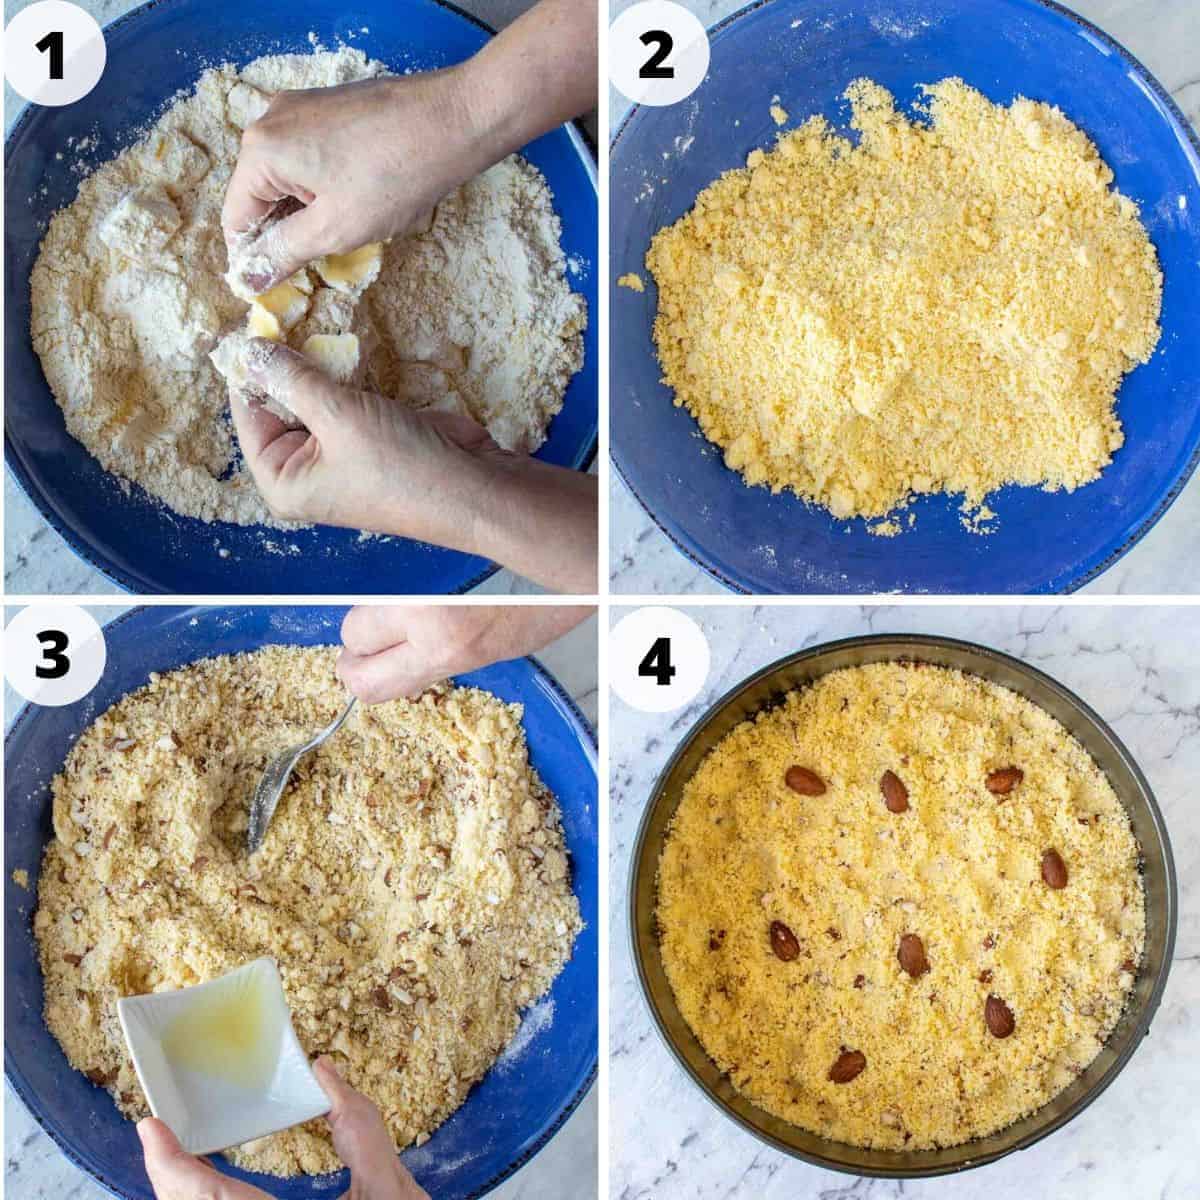 Four images - #1 butter being rubbed into flour; #2 yellow uncooked crumble in blue bowl; #3 nutty crumble in blue bowl with oil pouring in; #4 crumble pressed into round pan with almonds scattered on top.